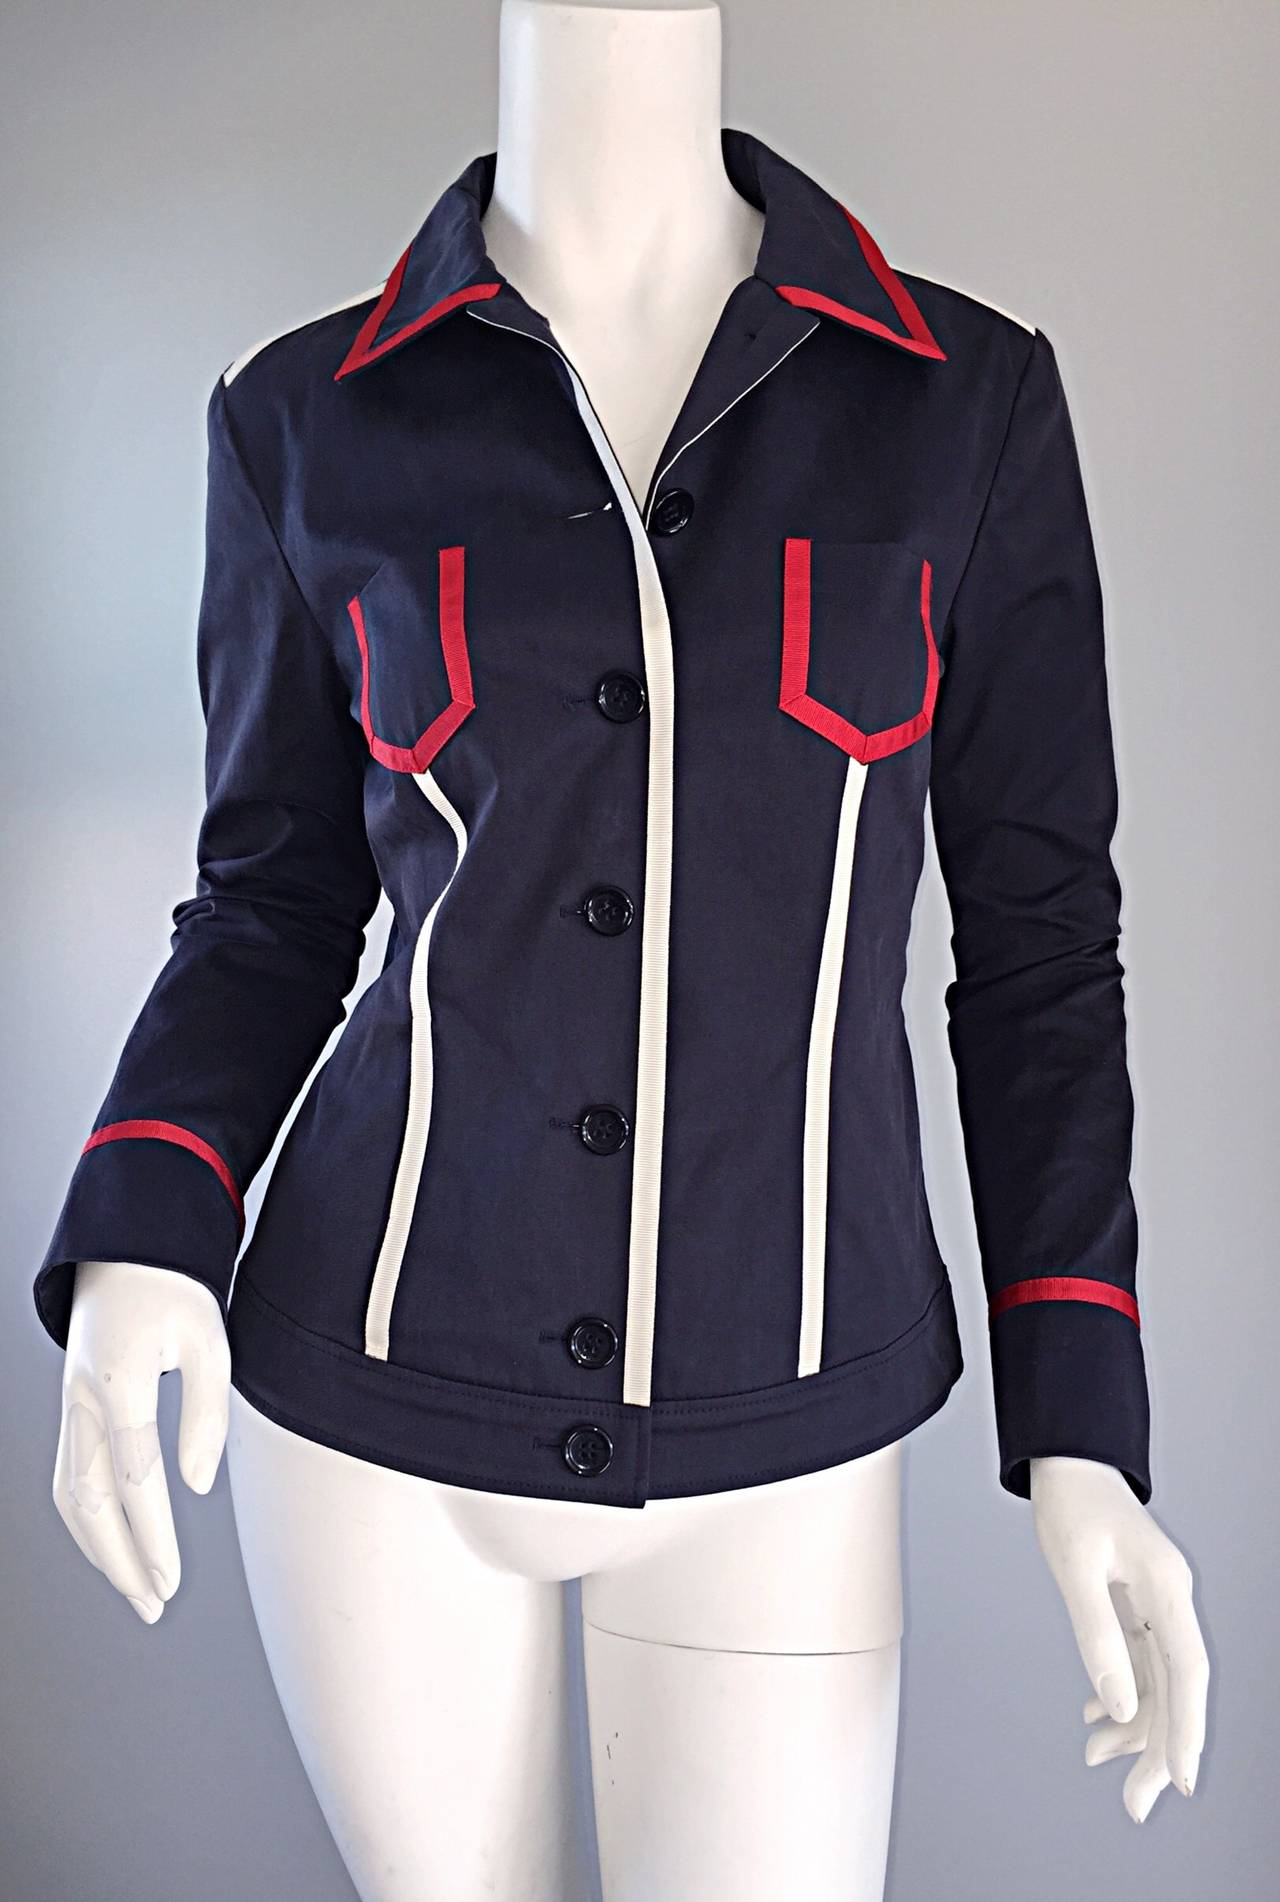 Nautical Escada navy blue jacket, with red and white ribbon detail throughout. The perfect lightweight jacket! Buttons all the way up the bodice, with buttons at each sleeve cuff. Great tailored fit that looks nice buttoned all the way up, or left